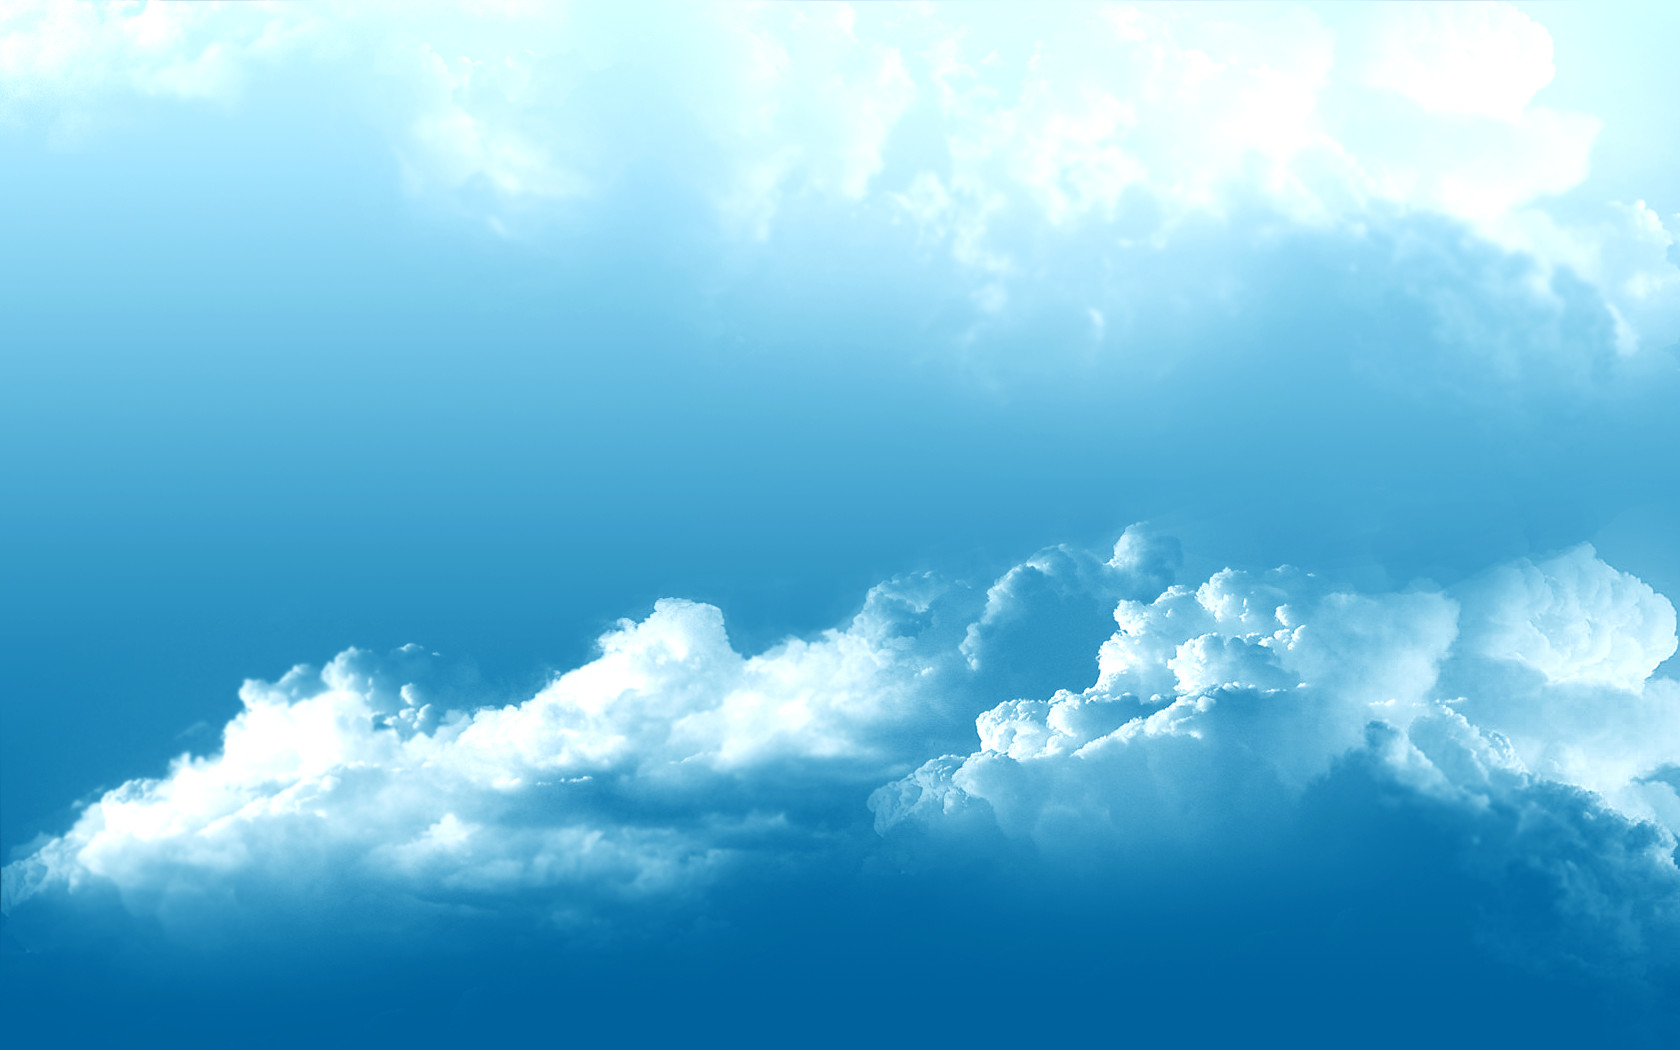  HQ Clouds Wall By Grubshaw Wallpaper   HQ Wallpapers 1680x1050